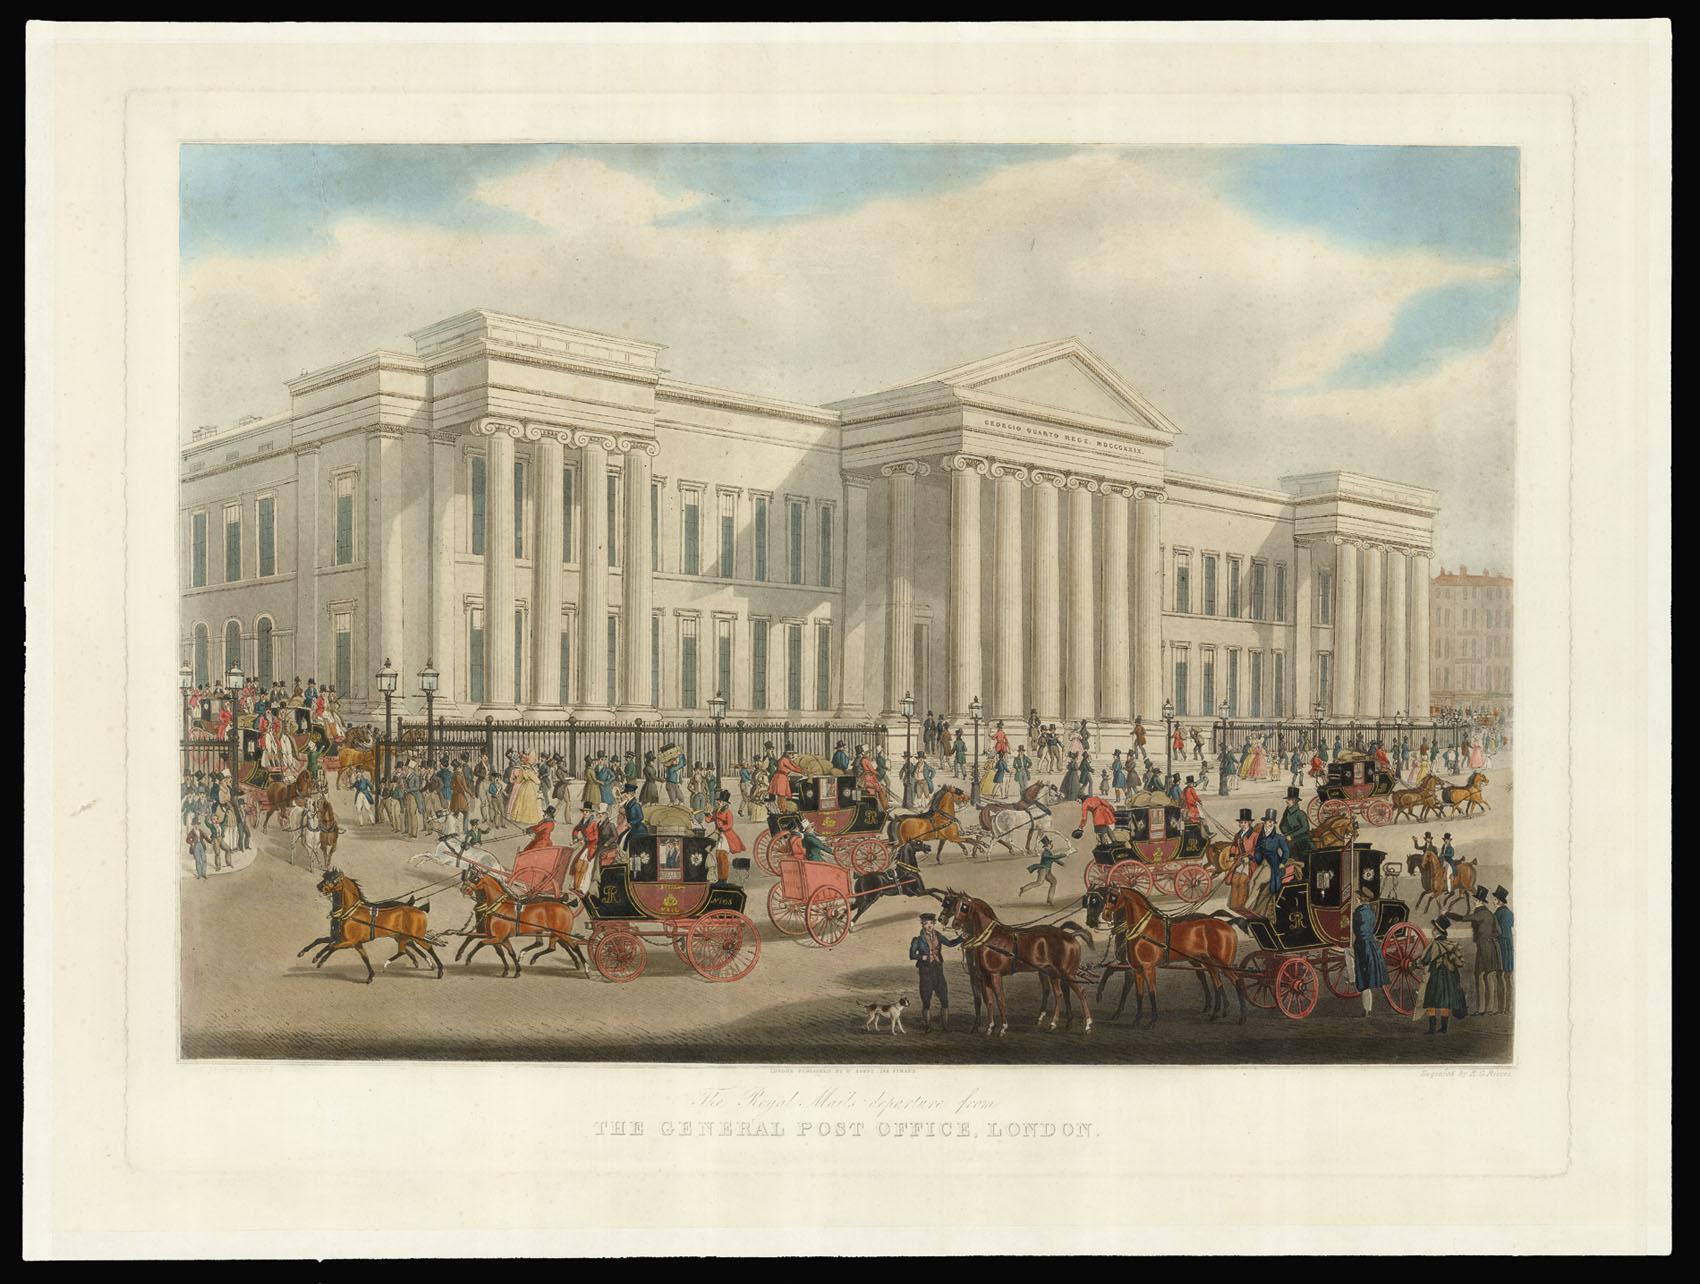 The Royal Mail's Departure from the General Post Office, London by REEVE,  Richard Gilson after POLLARD, James: (1830) Photograph | Daniel Crouch Rare  Books Ltd